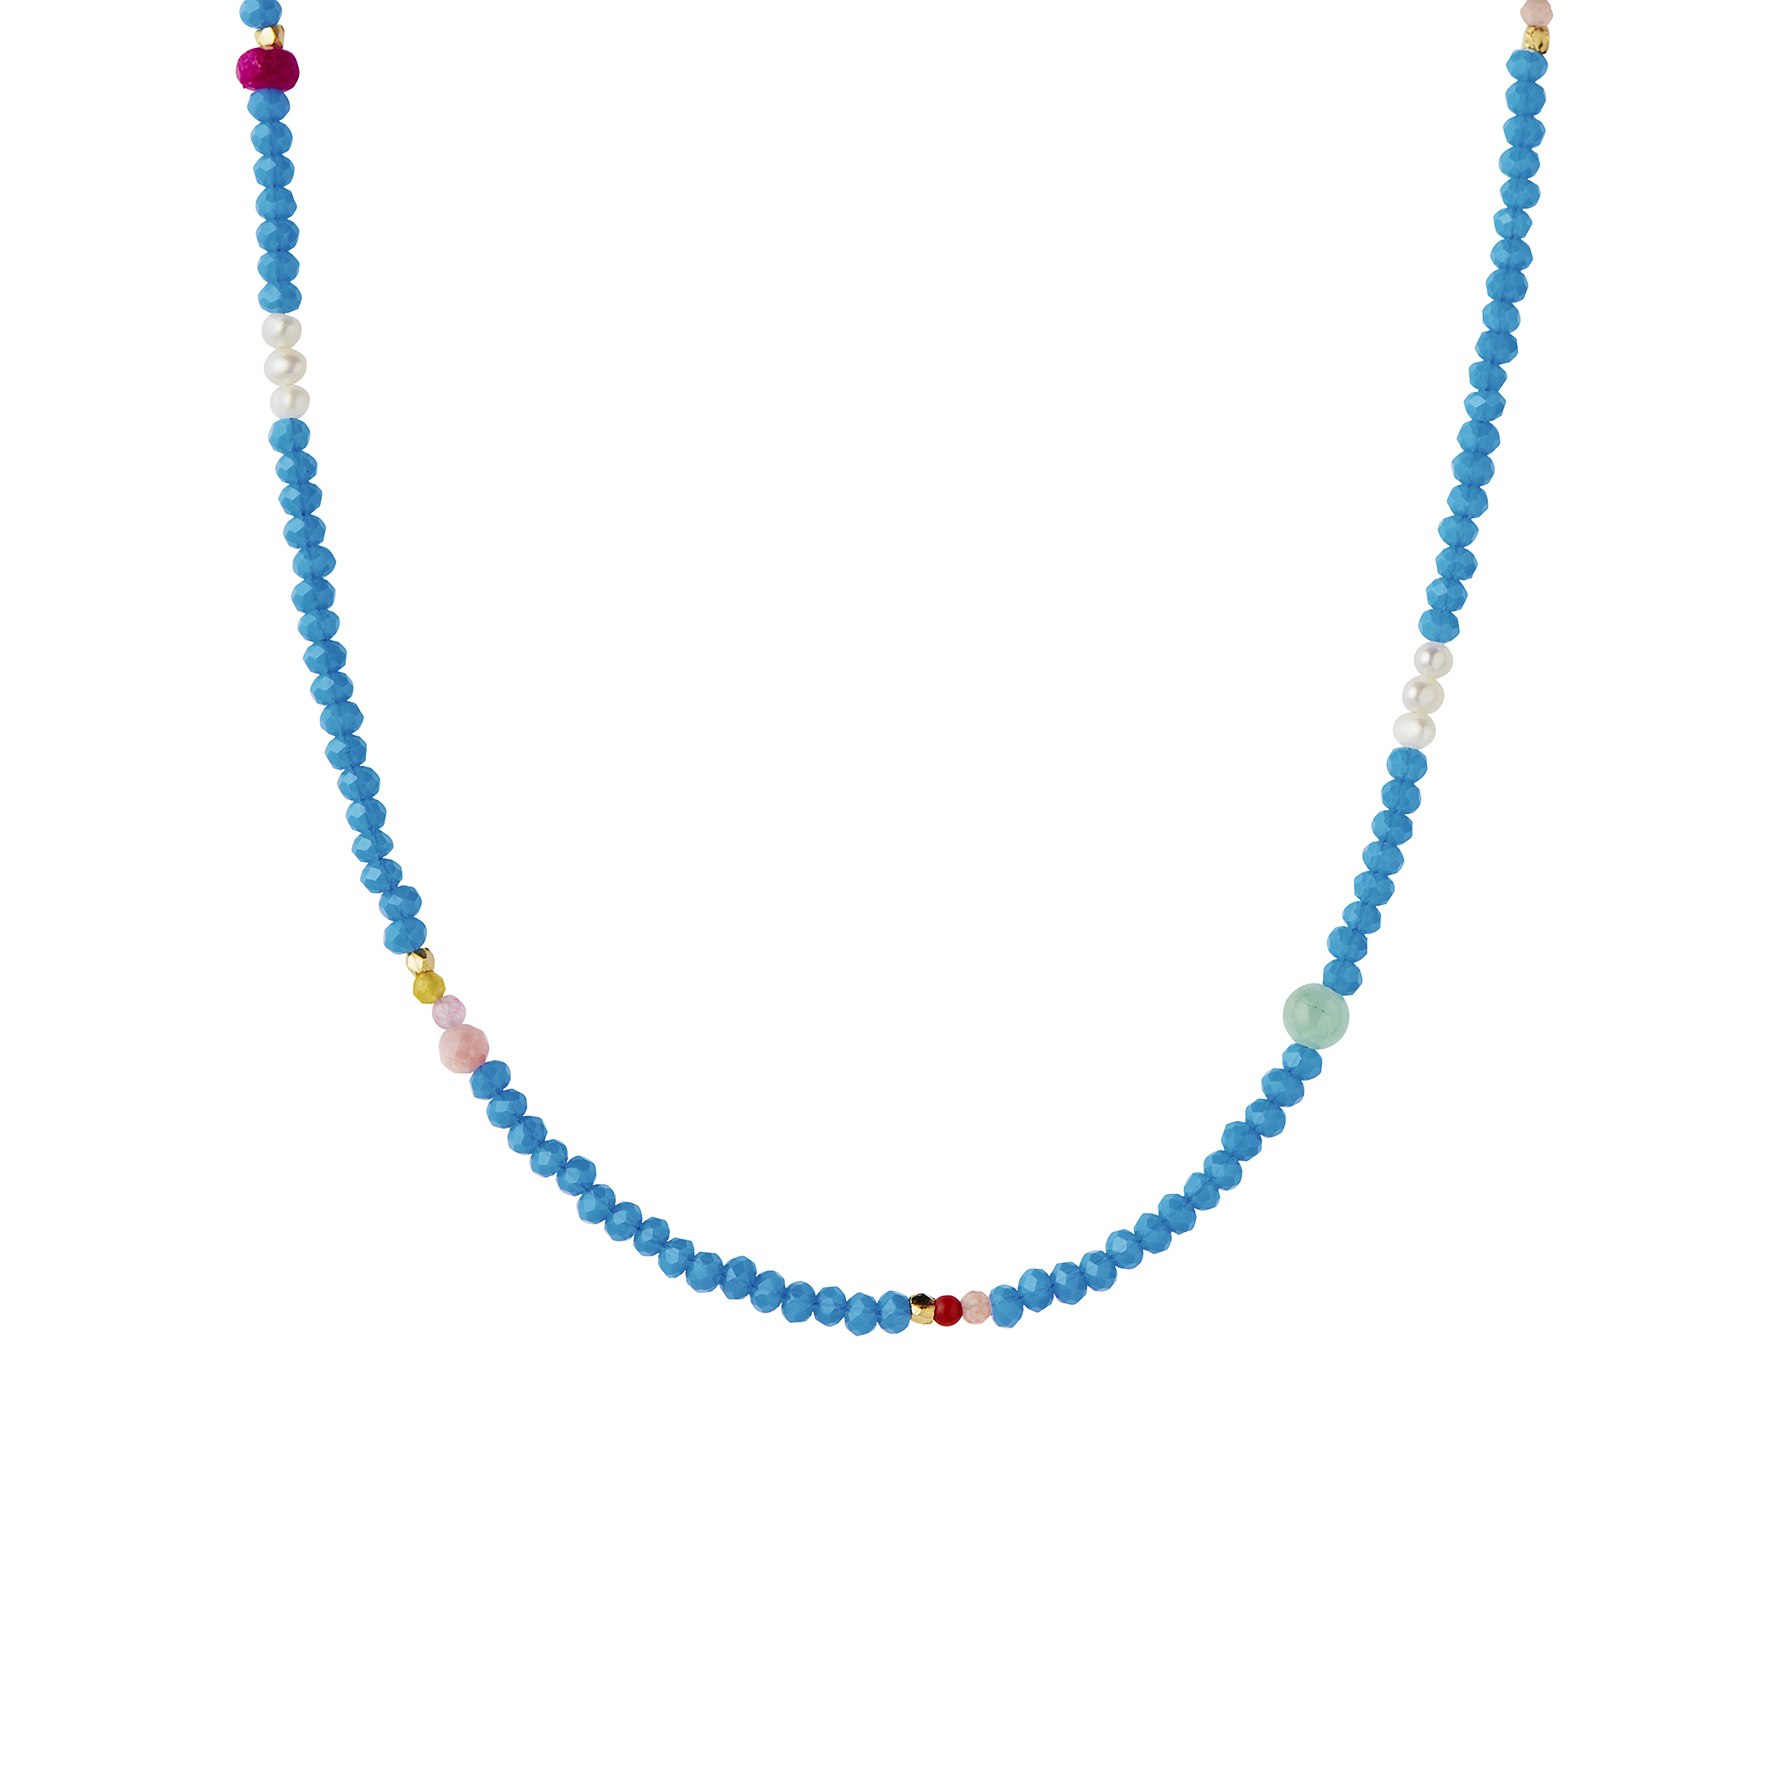 Color Crush Necklace - Santorini Mix from STINE A Jewelry in Goldplated-Silver Sterling 925